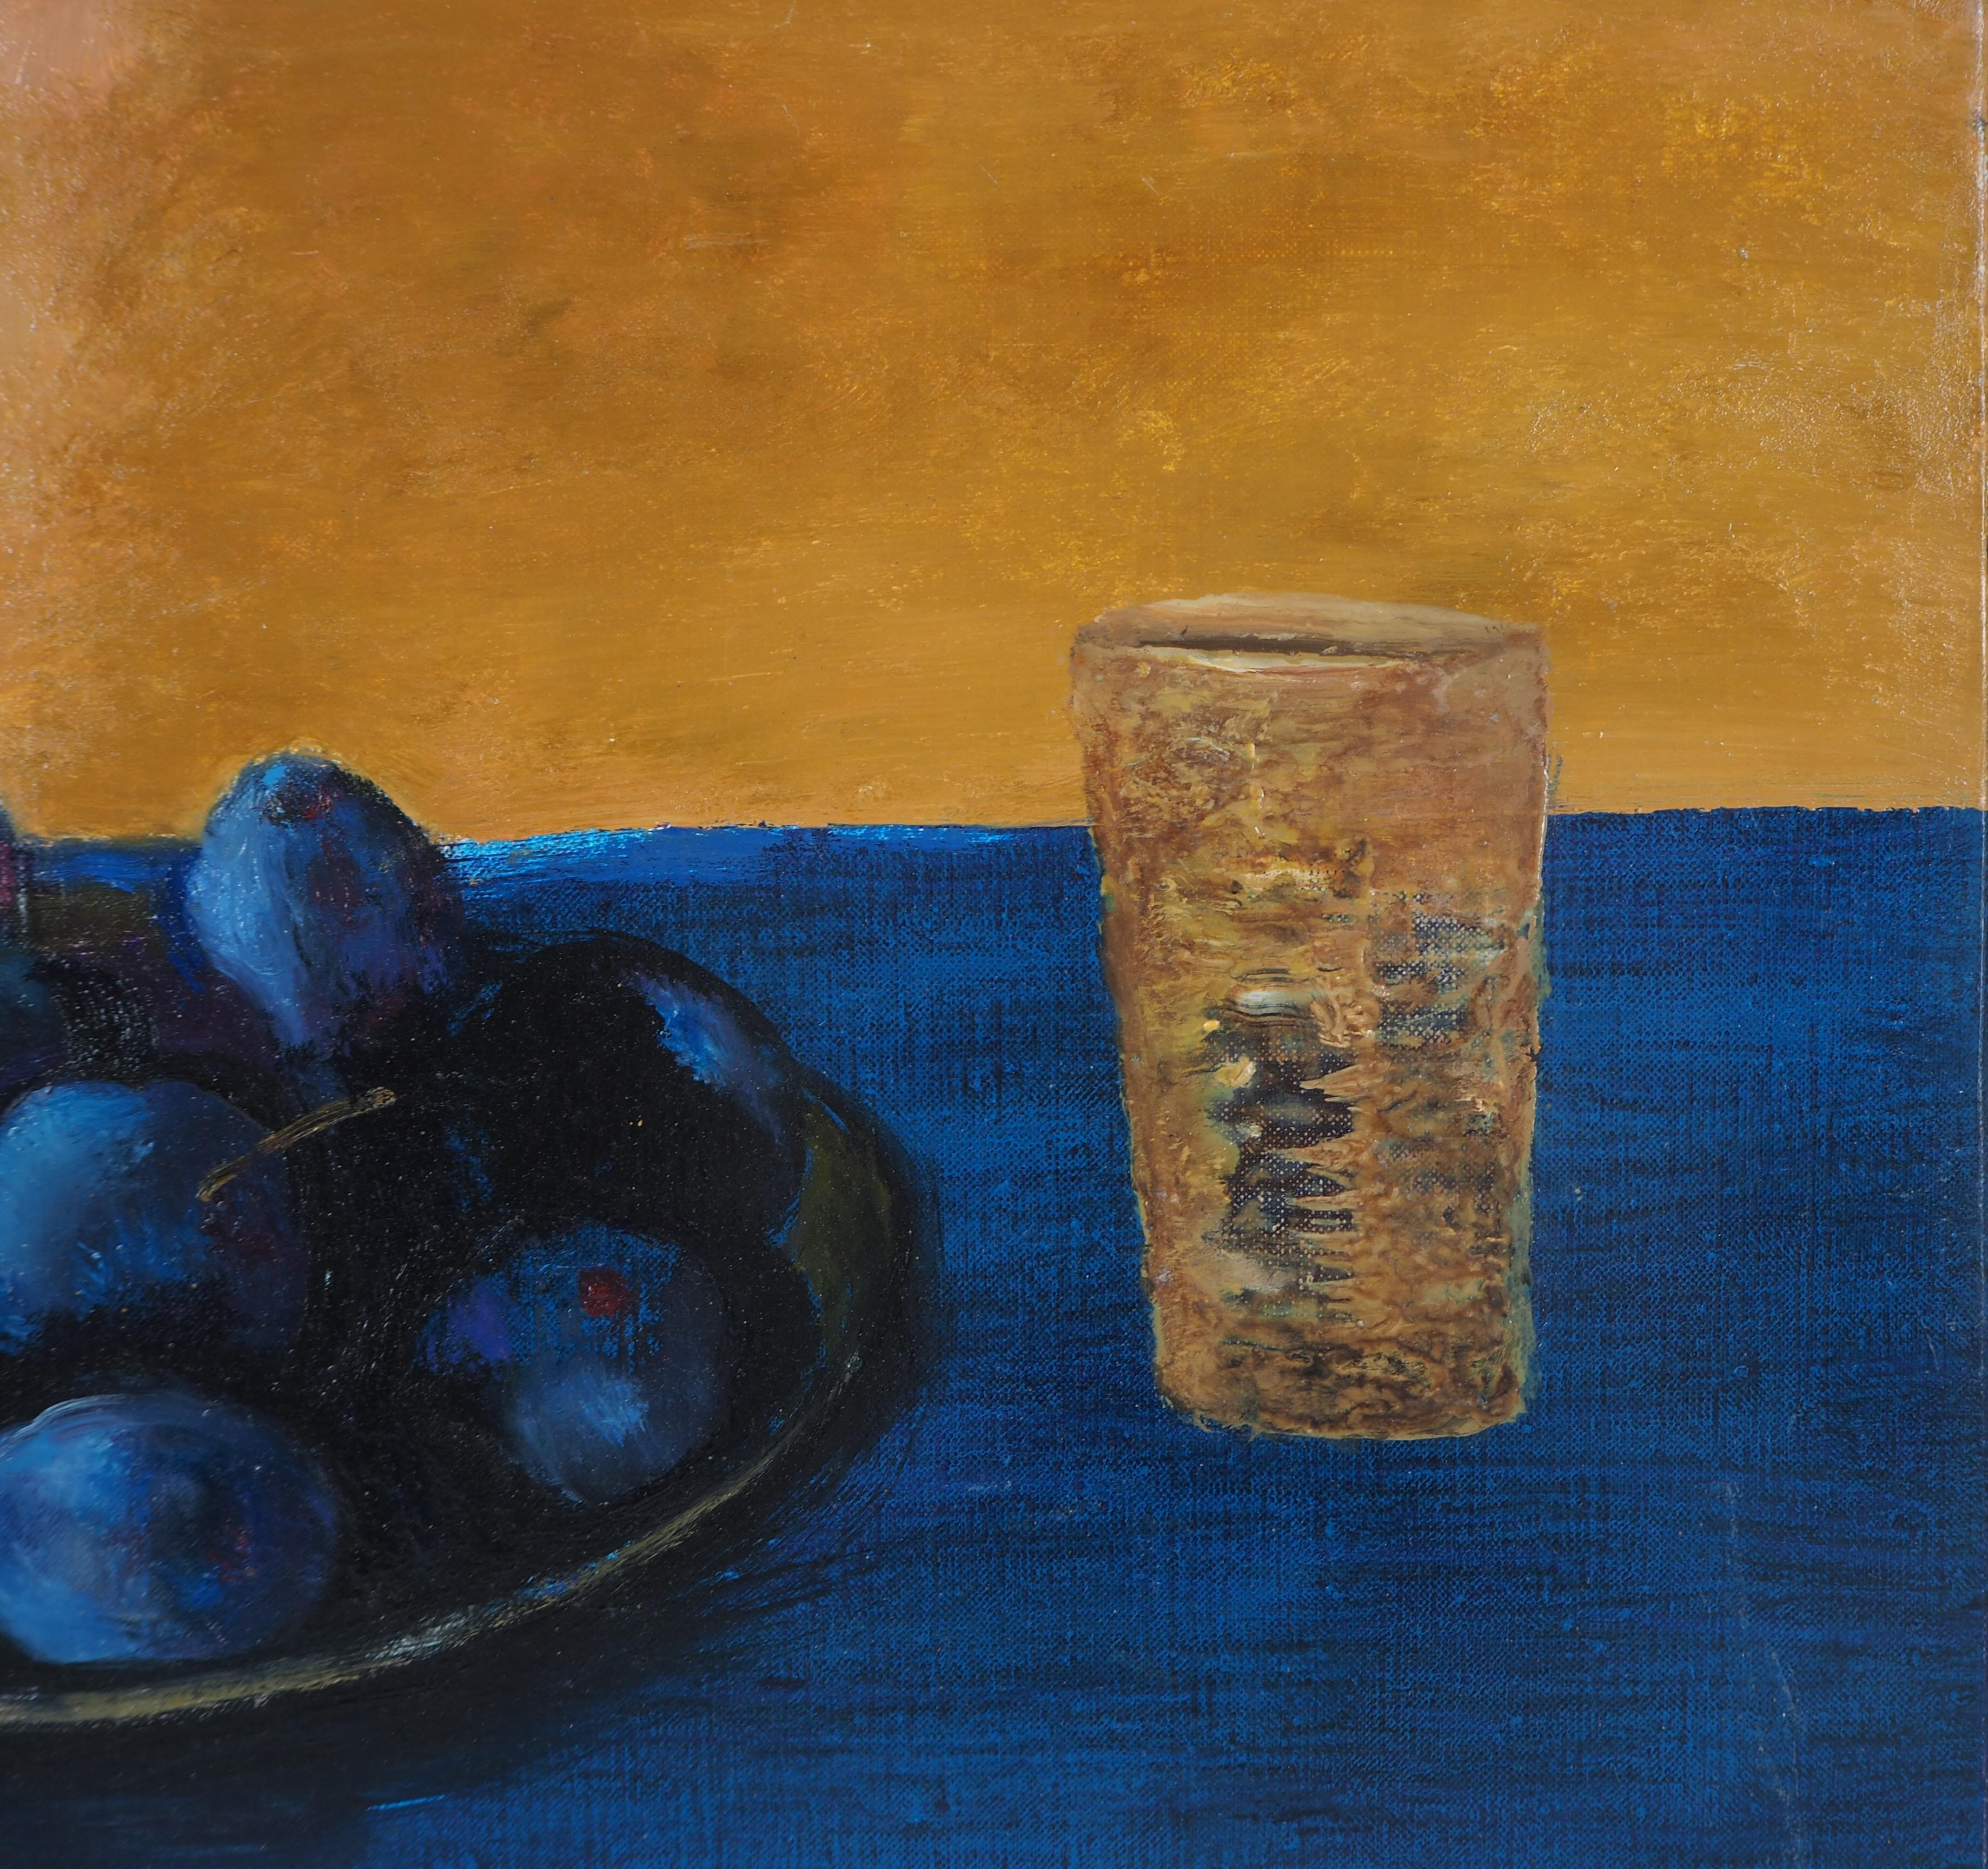 René Genis (1922-2004)
Still Life with Plums

Original oil on canvas
Signed right bottom
Size of the canvas 33 x 55 cm (c. 13 x 21.6 inch)

Excellent condition